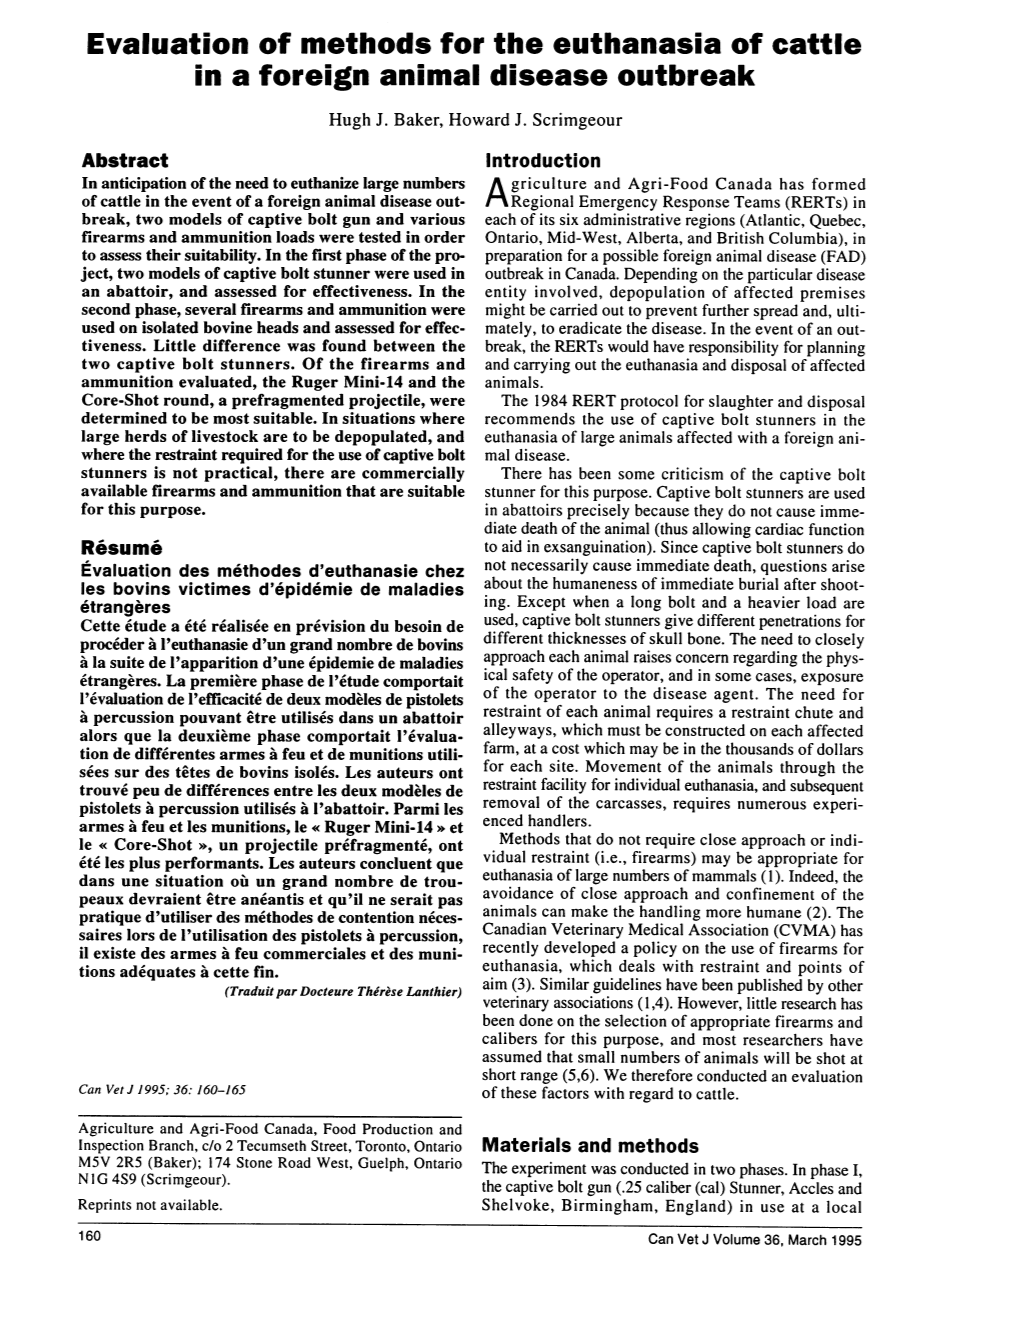 Evaluation of Methods for the Euthanasia of Cattle in a Foreign Animal Disease Outbreak Hugh J